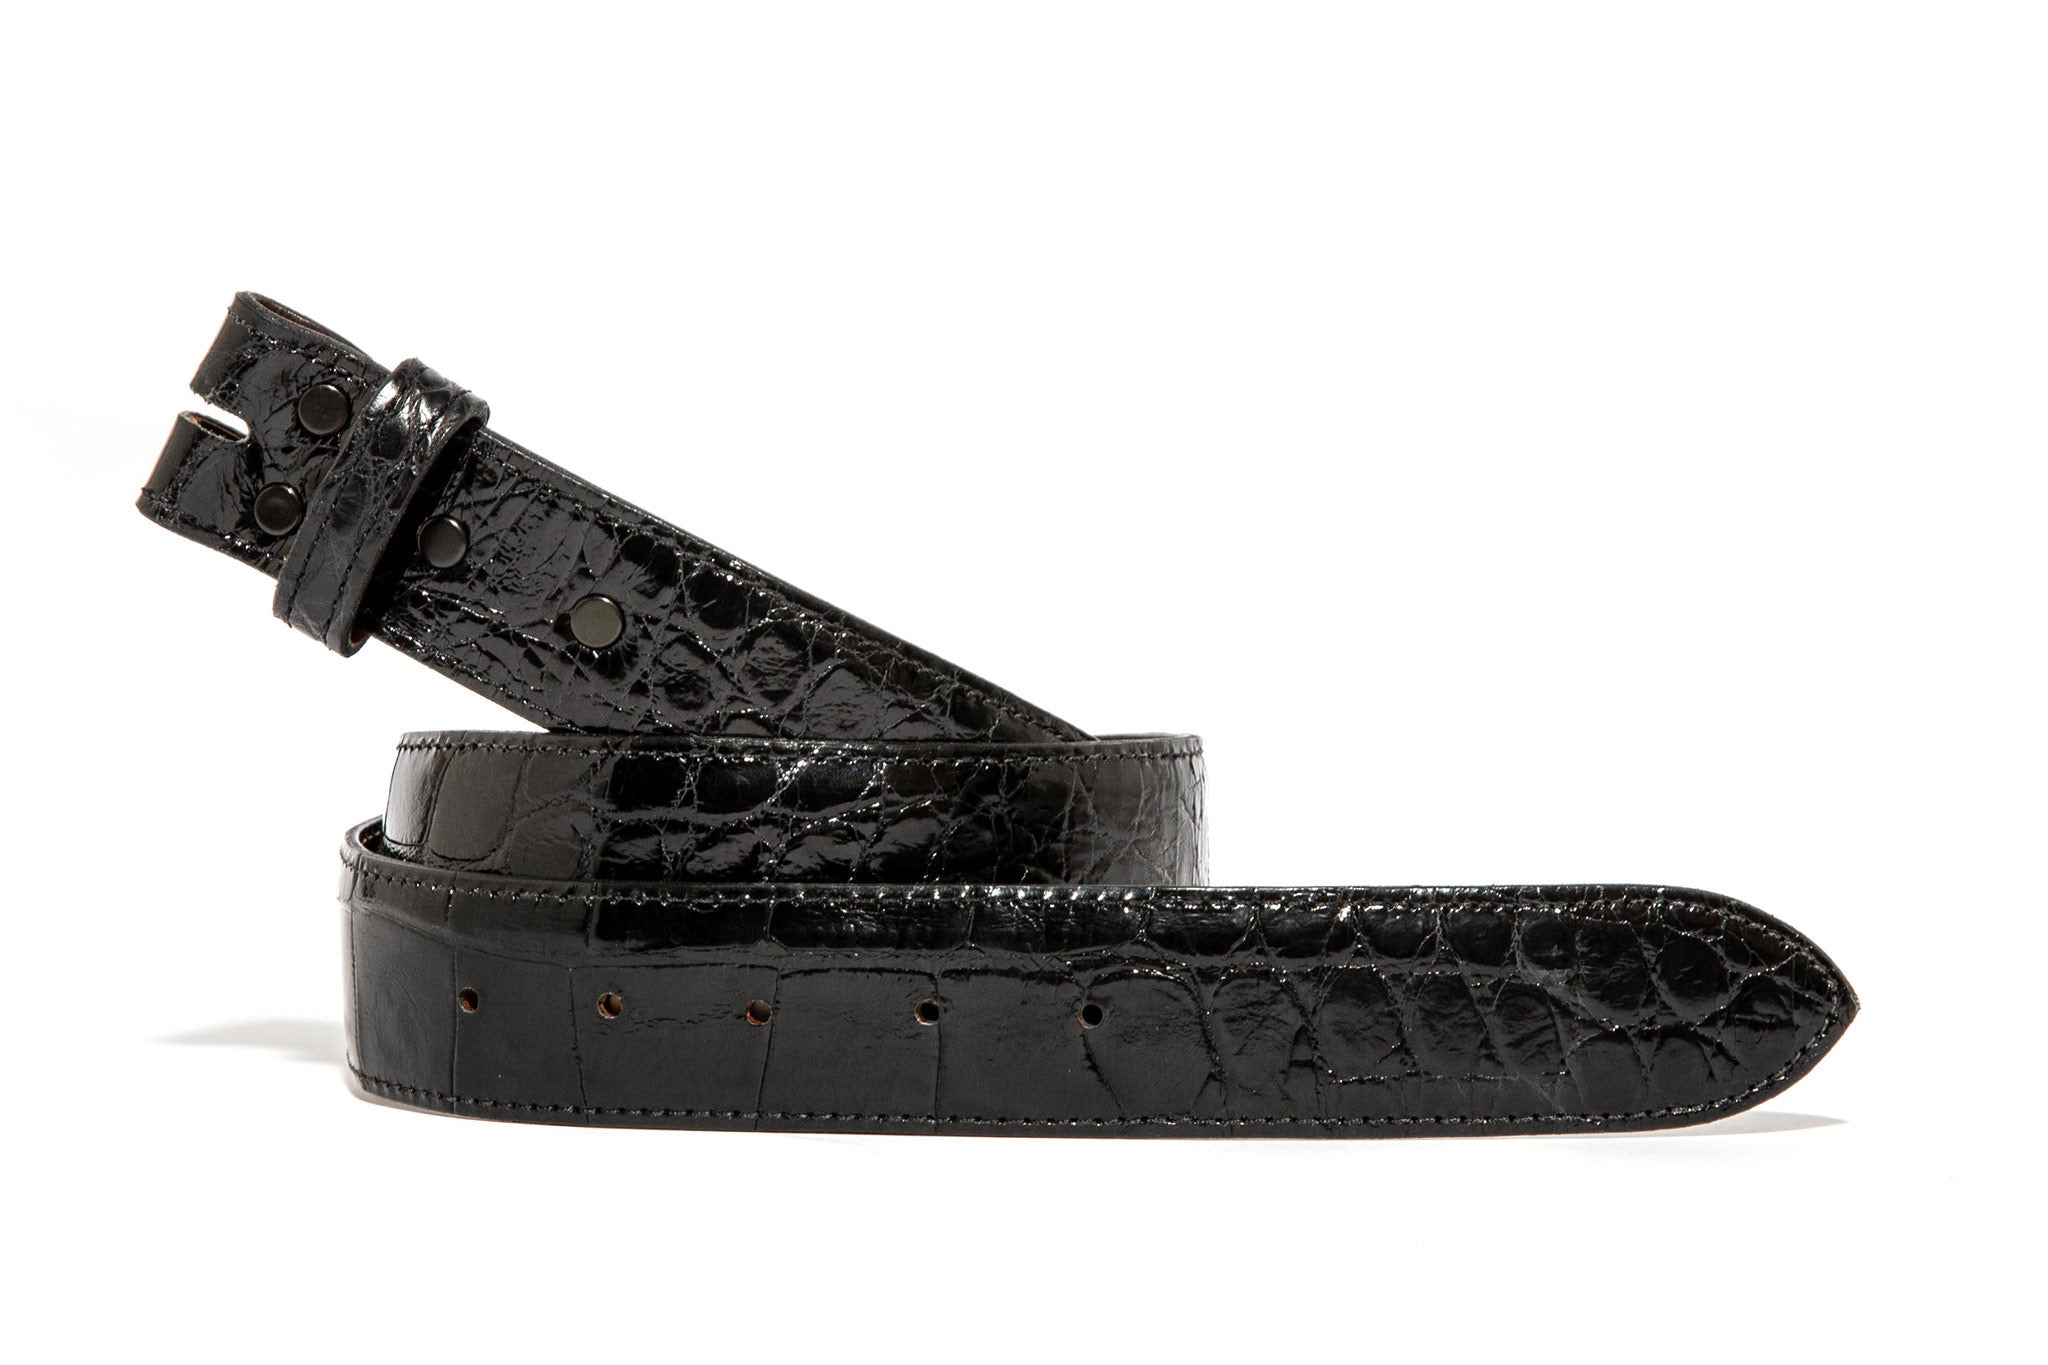 Black Alligator Classic Strap | Belts And Buckles - Belts | Chacon